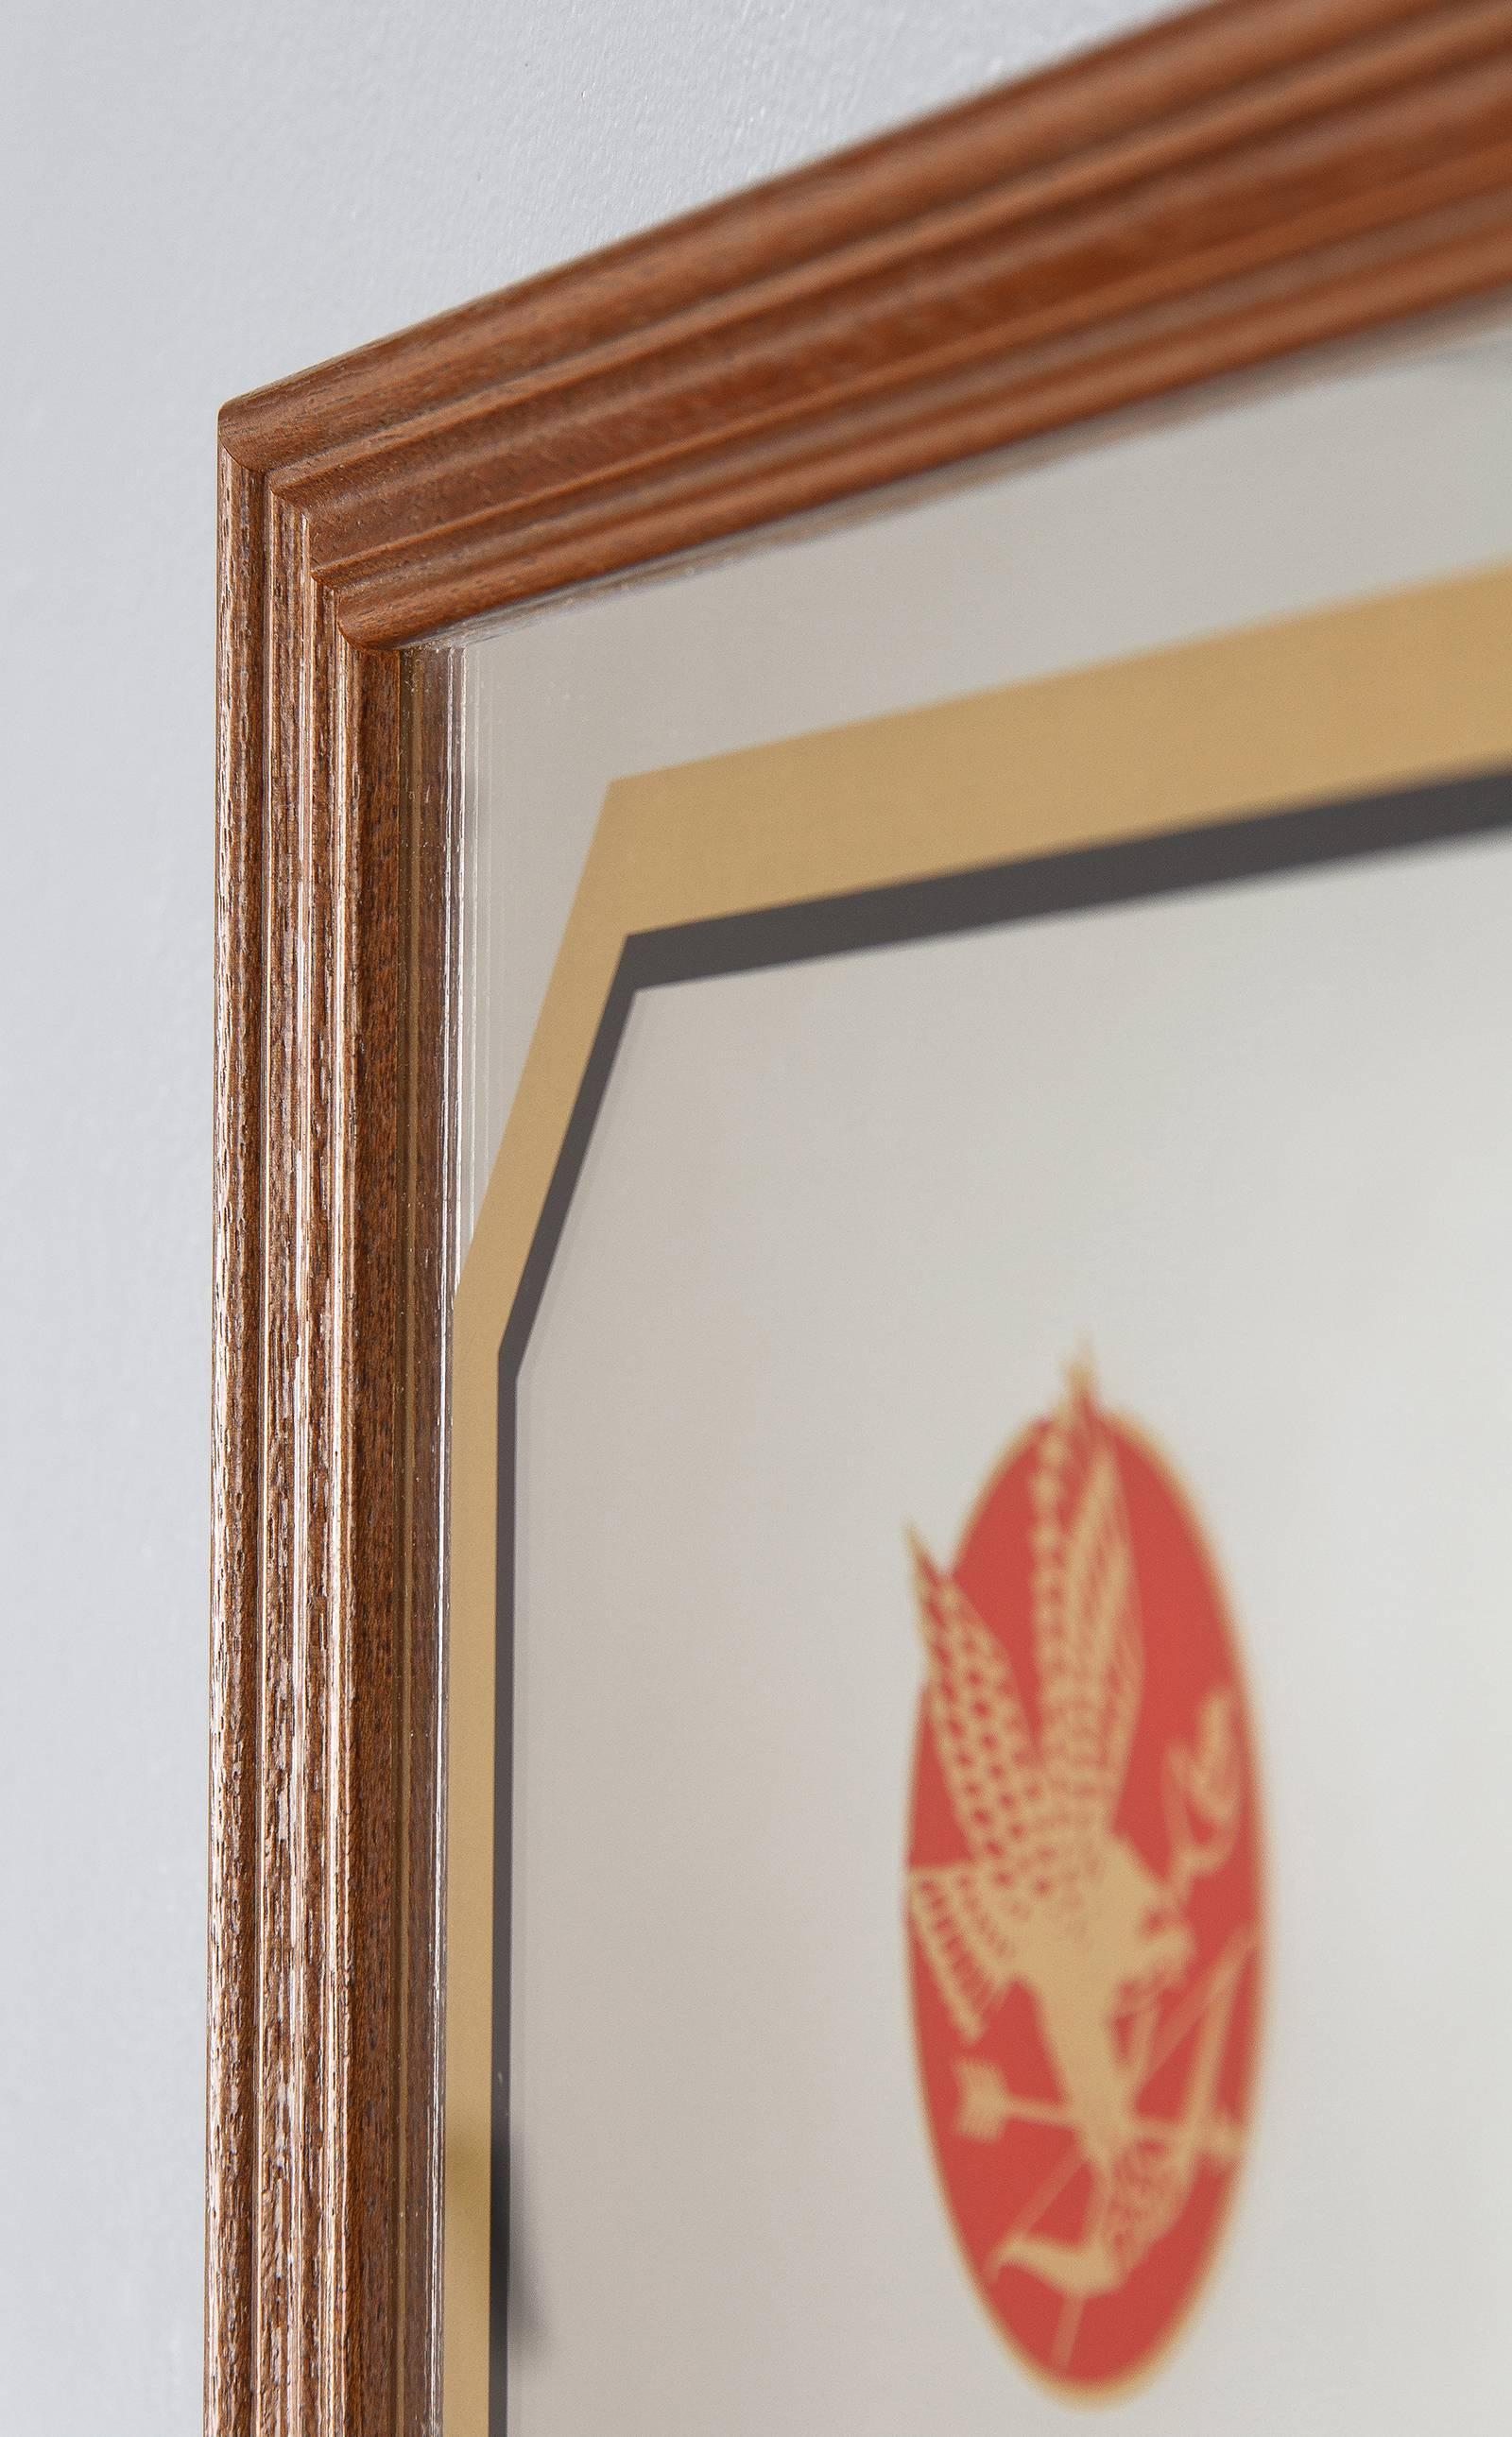 Late 20th Century Vintage Frame with Mirrored Advertising Sign for Clan Campbell Scotch, 1980s